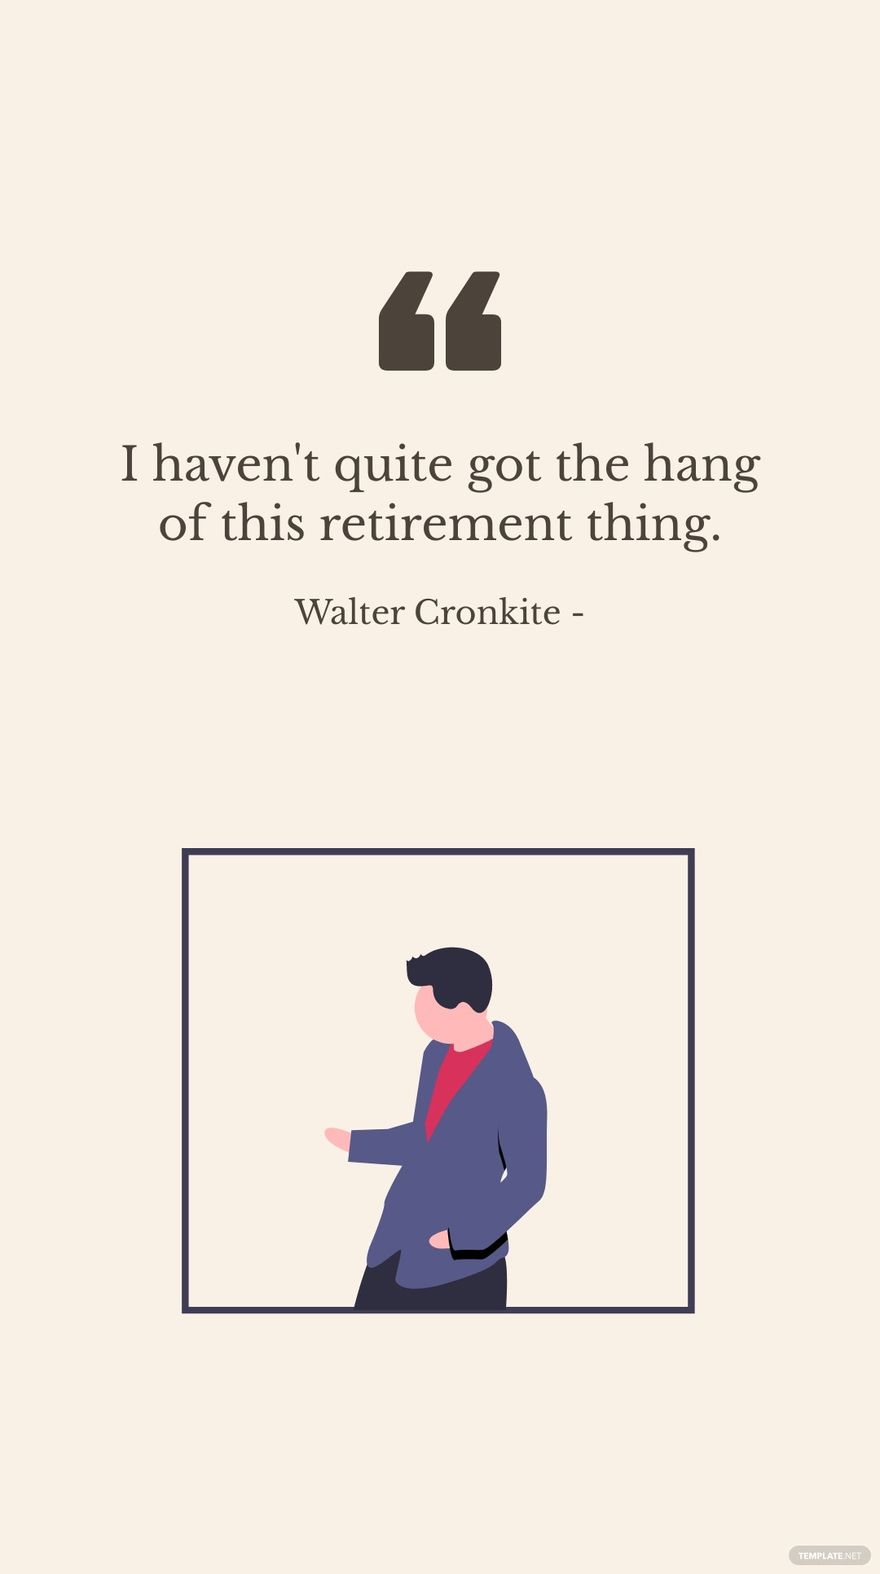 Free Walter Cronkite - I haven't quite got the hang of this retirement thing. in JPG